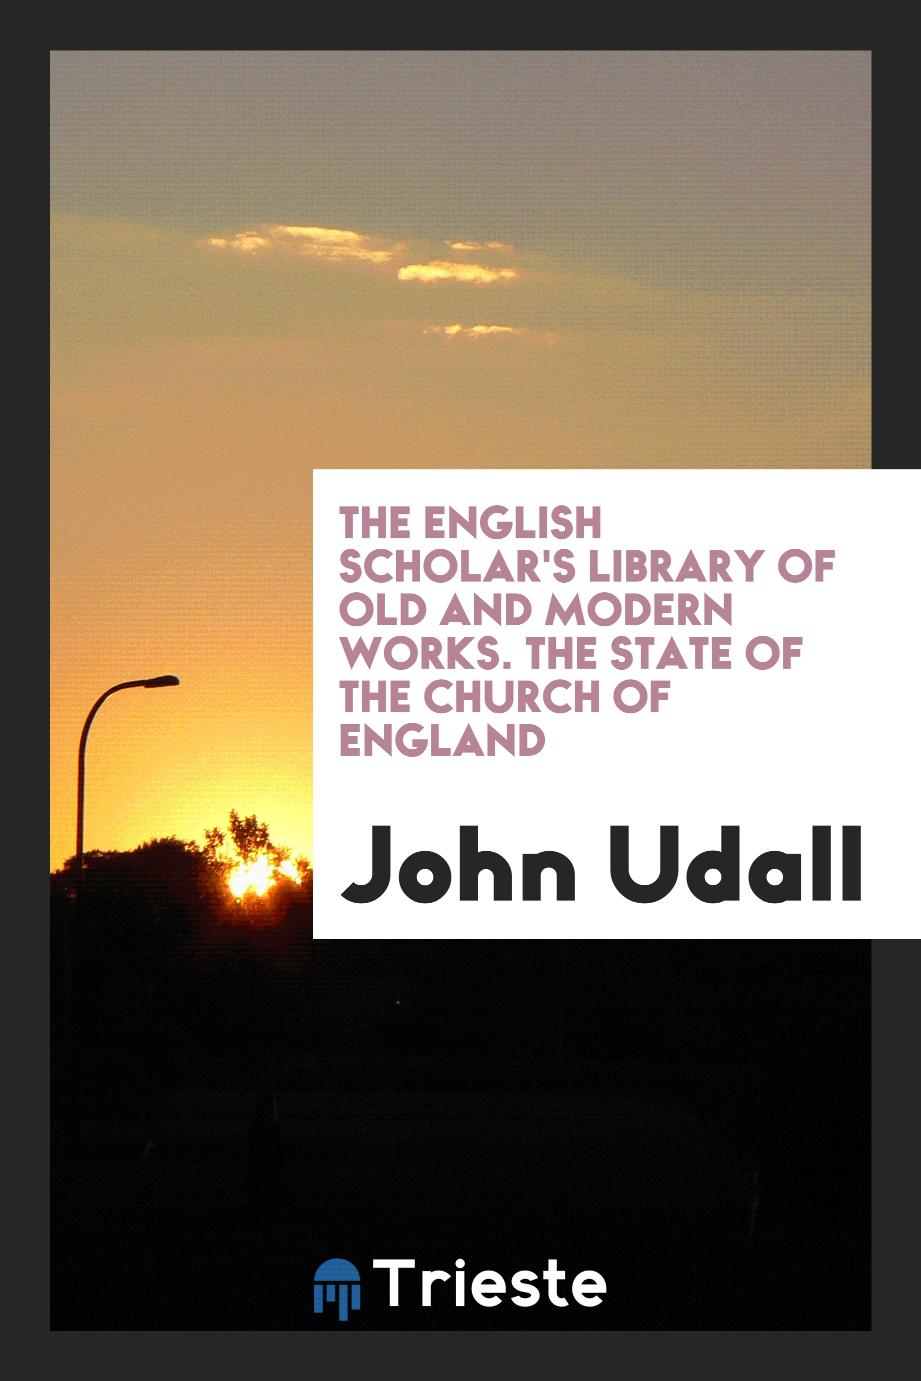 The English scholar's library of old and modern works. The State of the Church of England